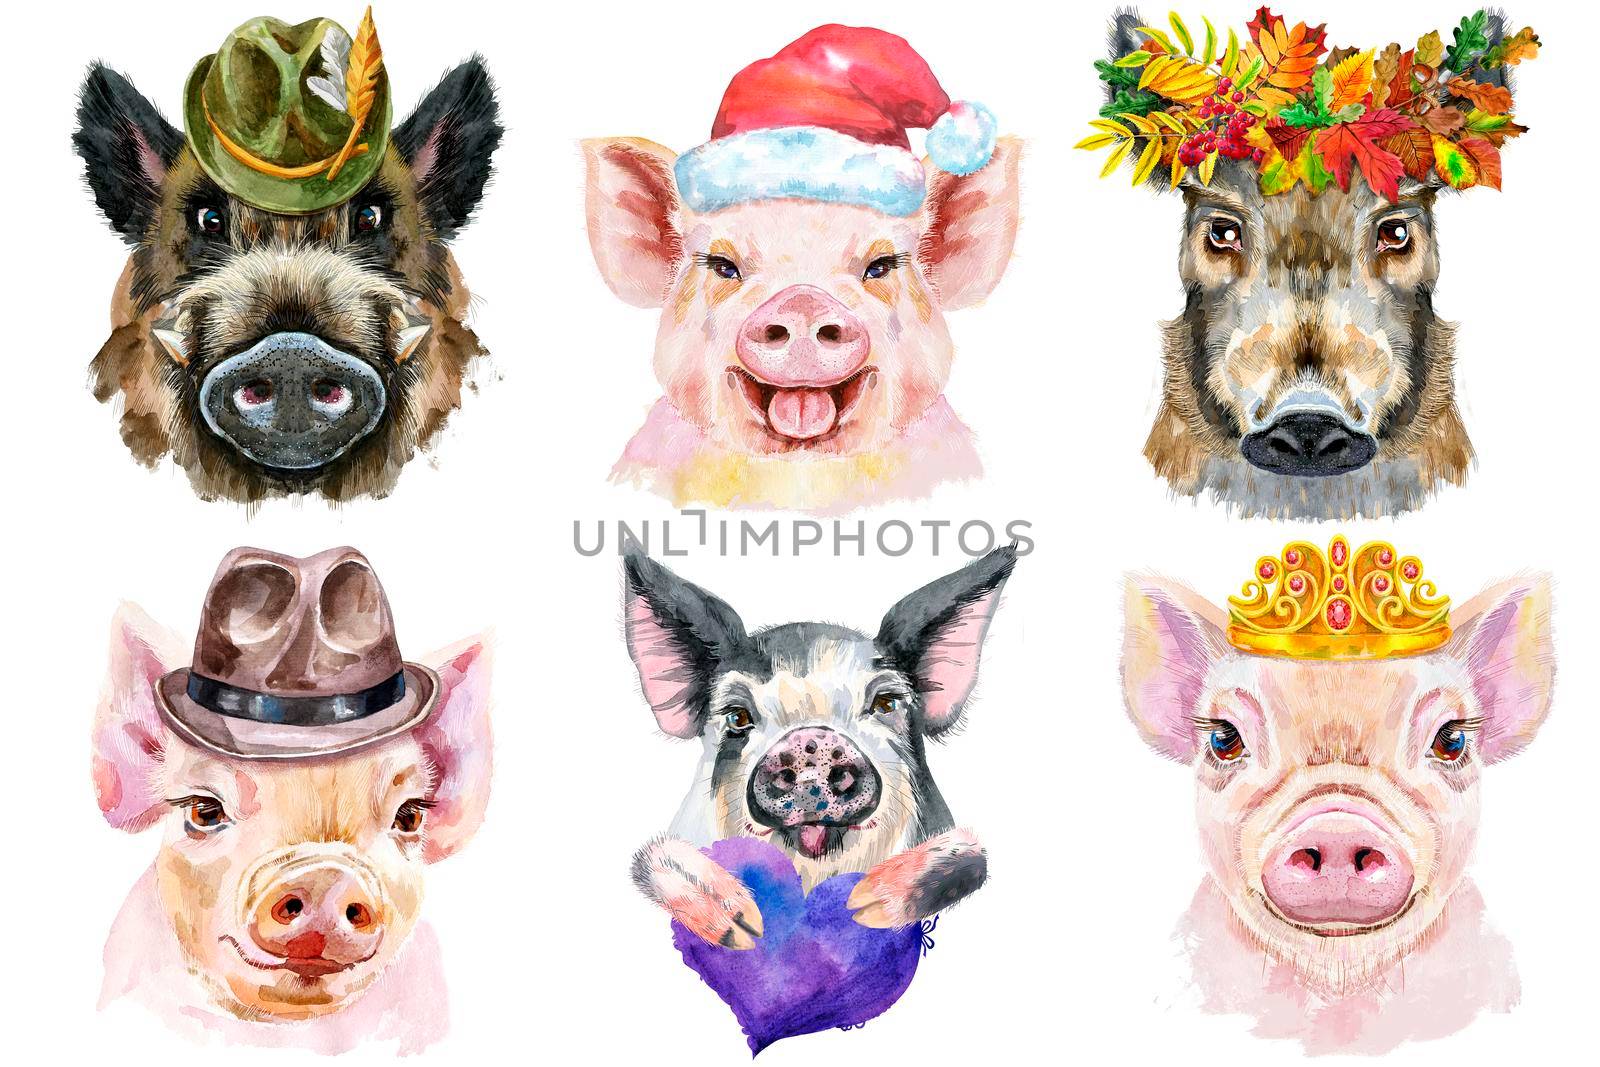 Watercolor illustration of pigs in wreath of autumn leaves, hats, Santa hats, golden crown, with violet heart